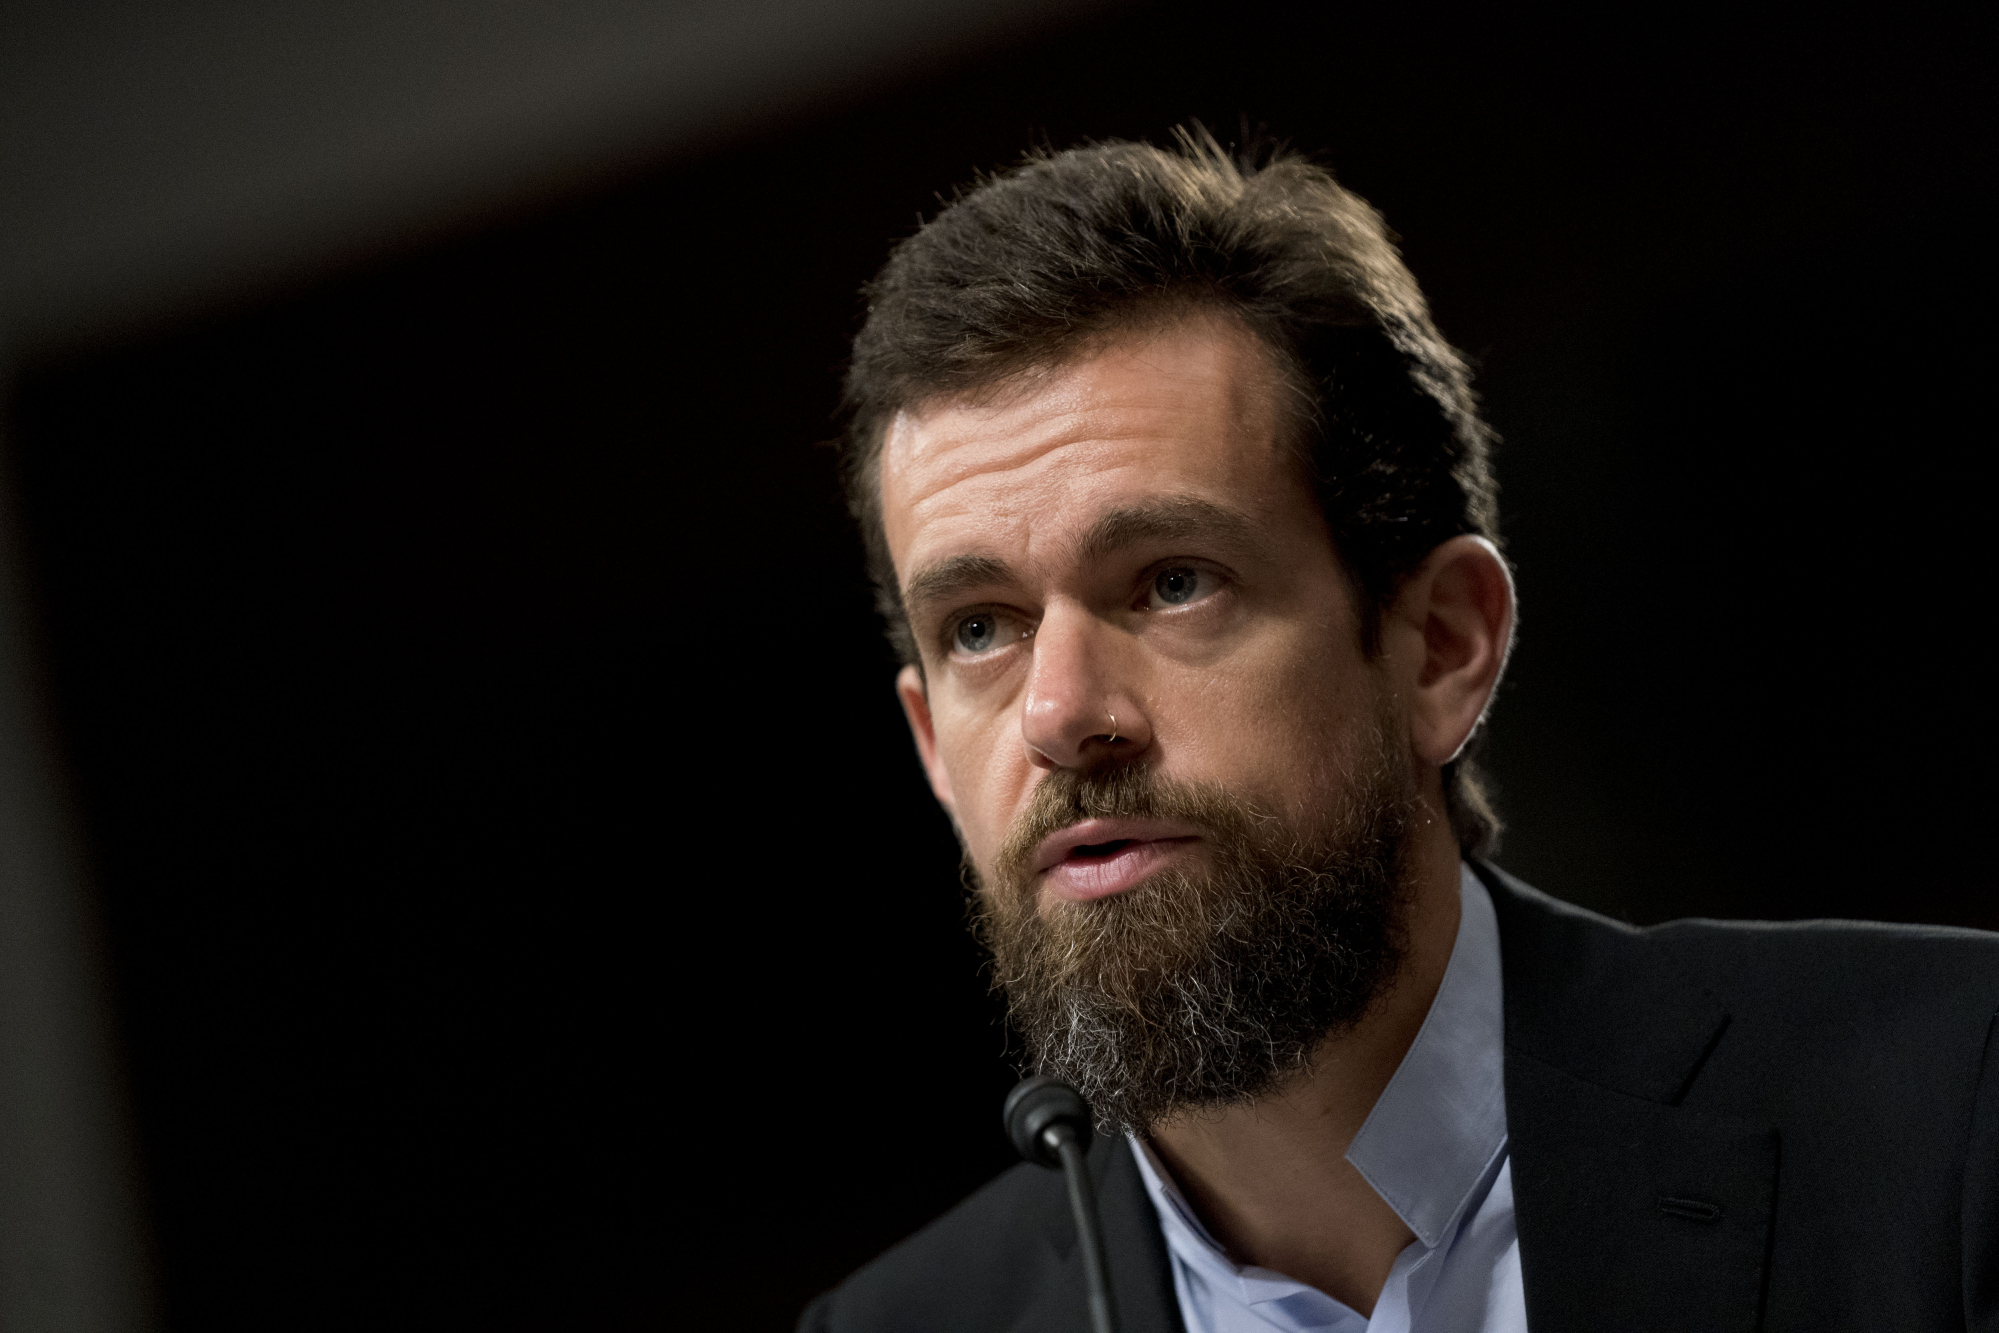 Jack Dorsey Has Resigned From Twitter - Crypto Briefing